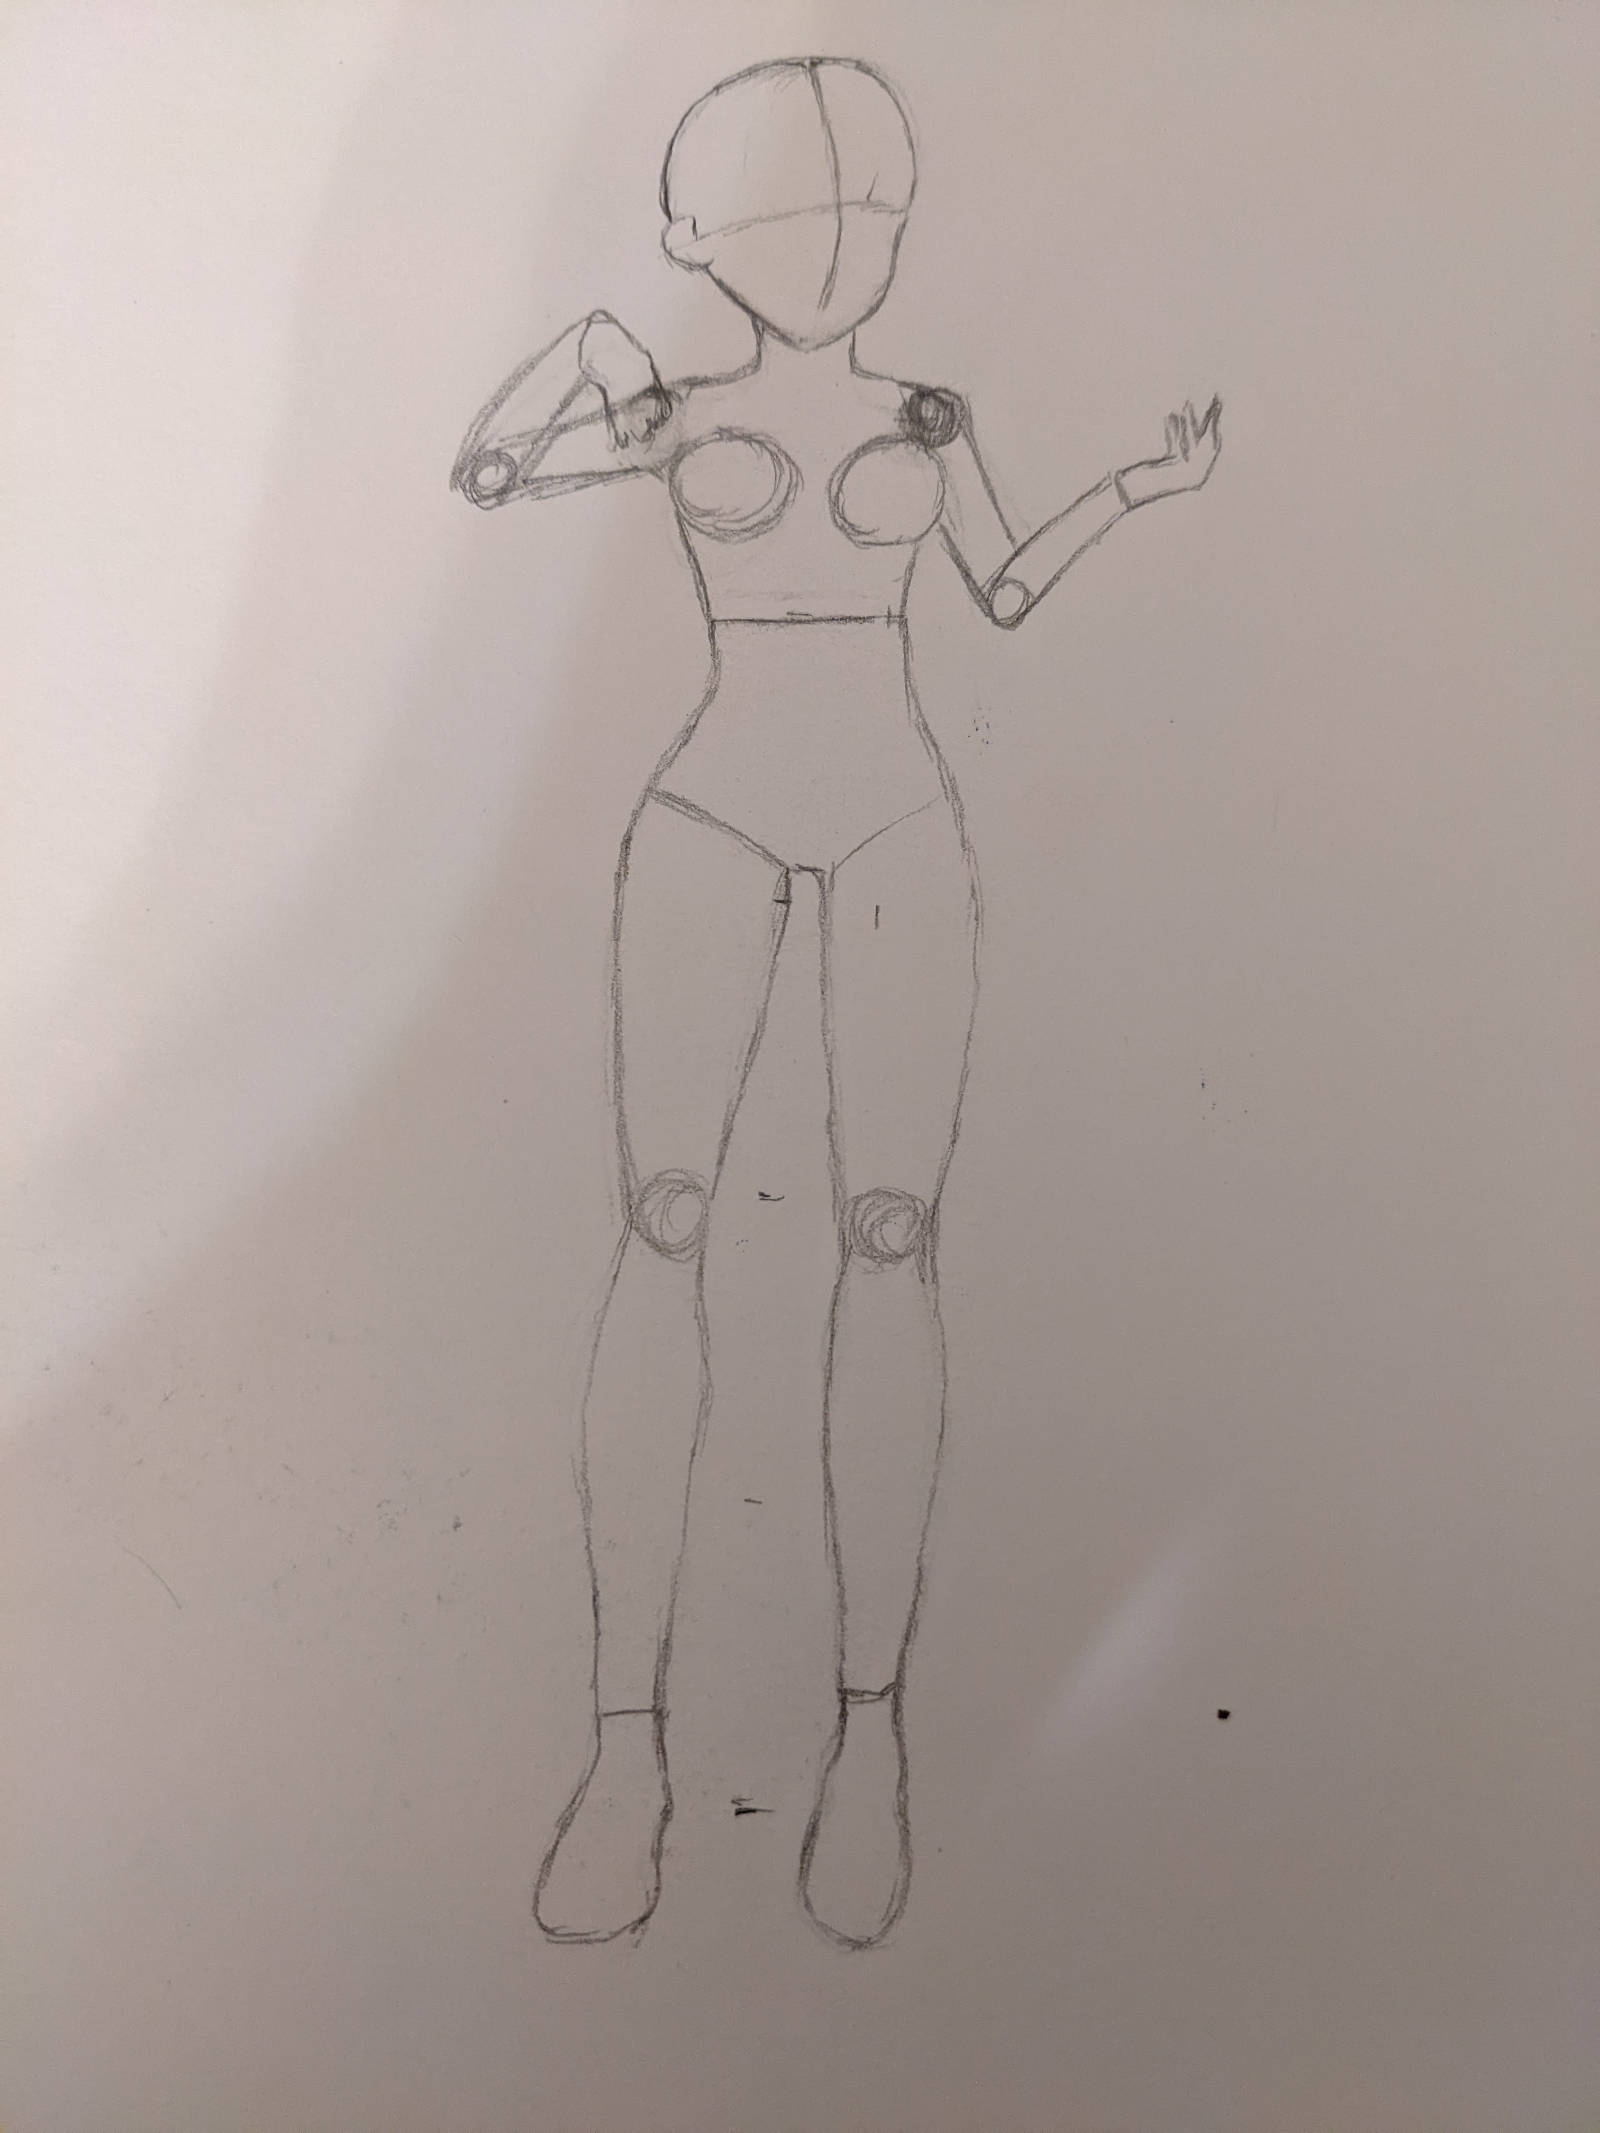 Penciled outline of female drawing.